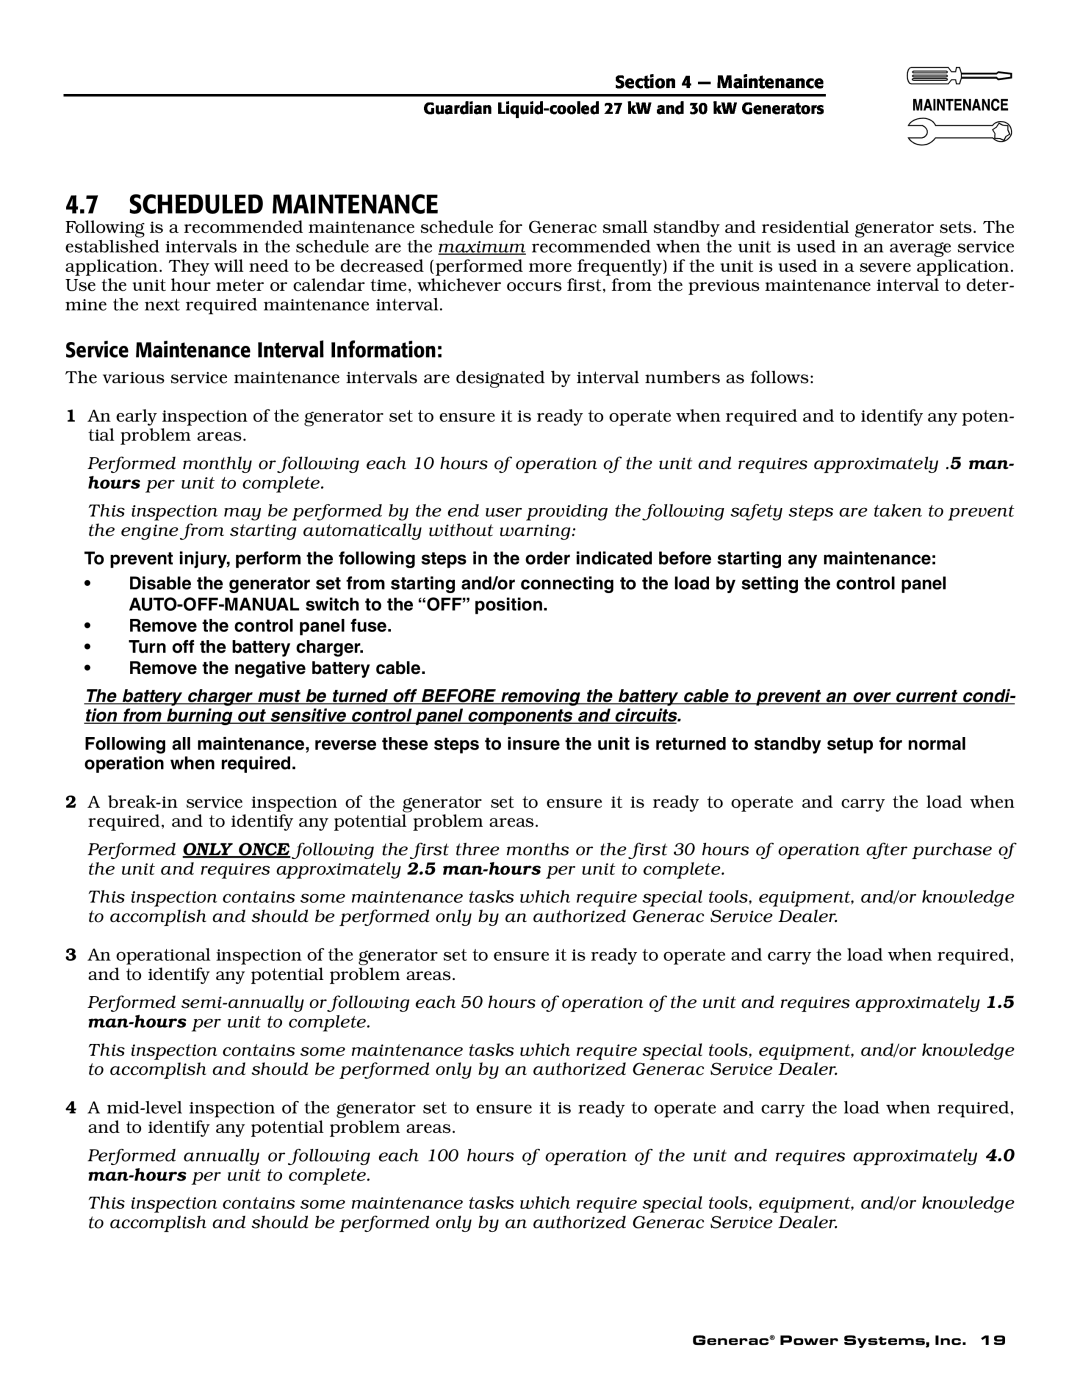 Generac Power Systems 004988-1 owner manual 4.7SCHEDULED MAINTENANCE, Service Maintenance Interval Information 